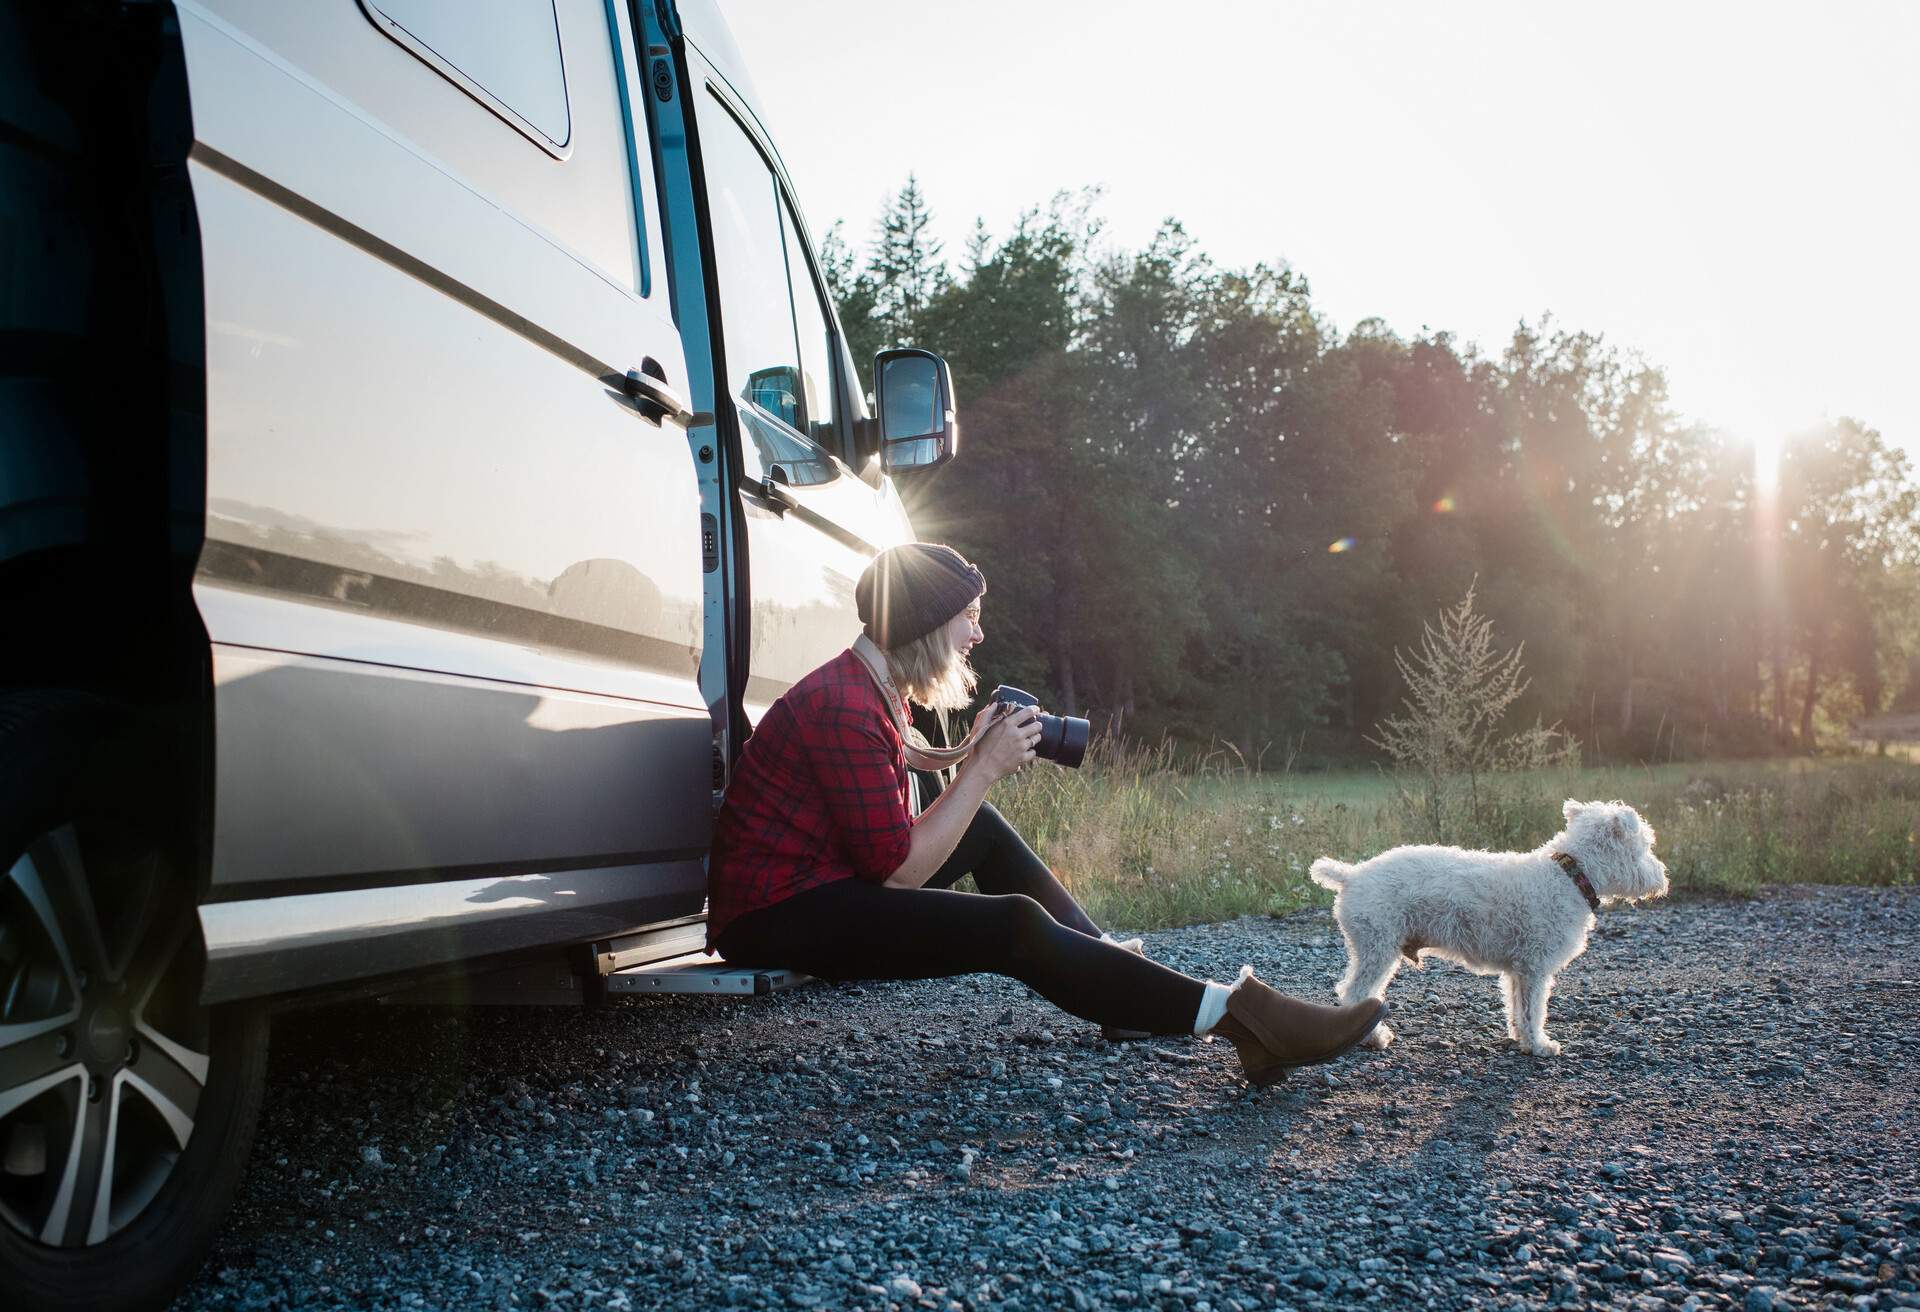 theme_car_roadtrip_dog_people_device_gettyimages-1189142902_universal_within-usage-period_83133.jpg